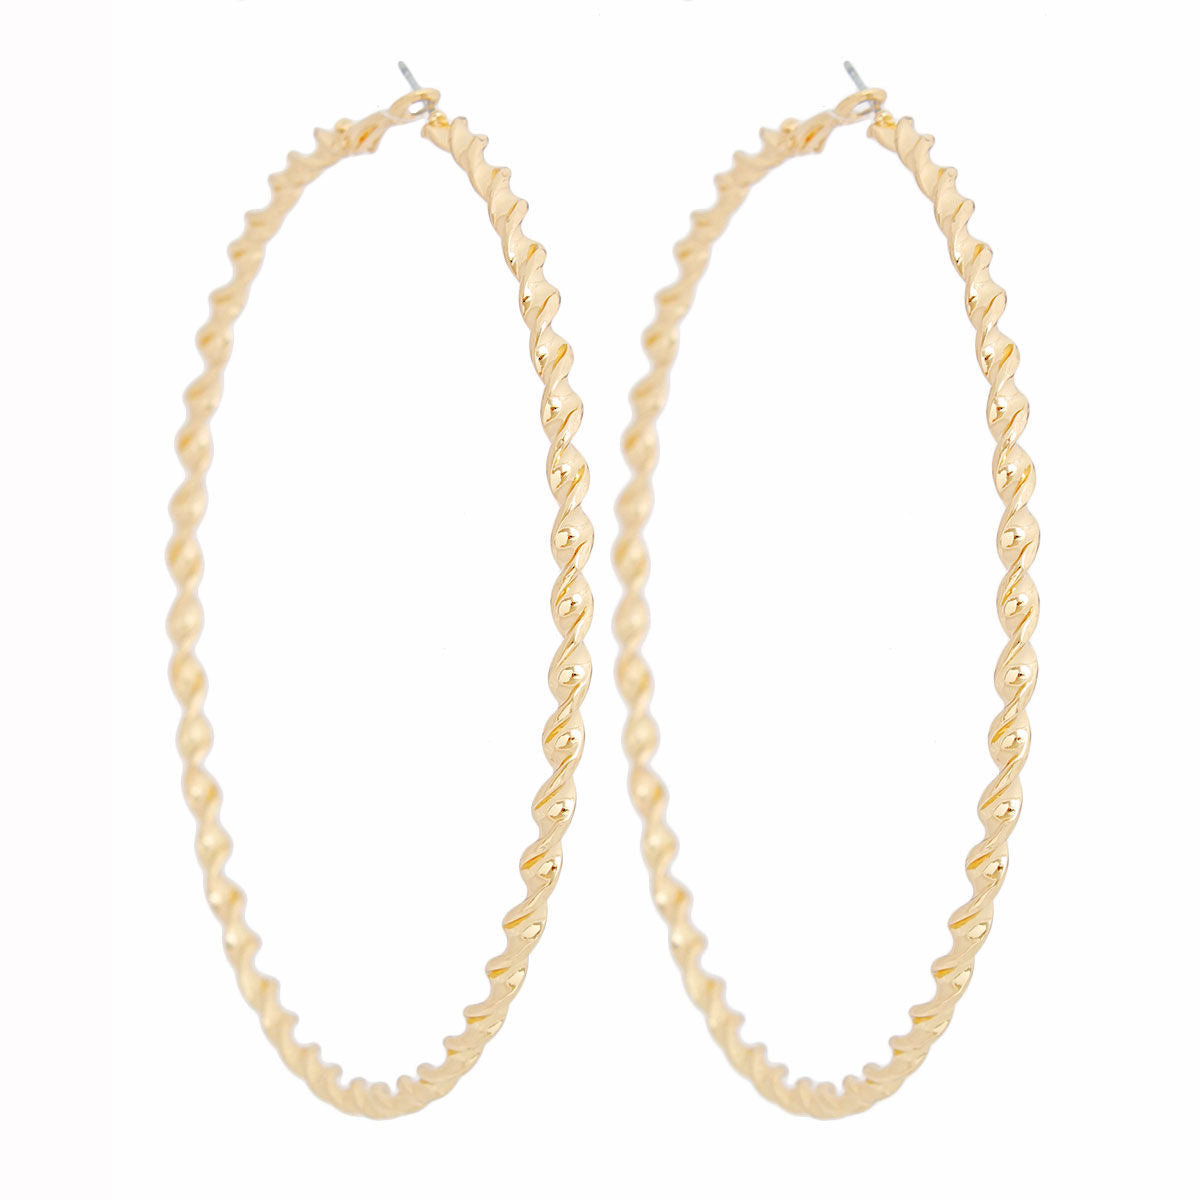 Hoops Large Twisted Gold Earrings for Women